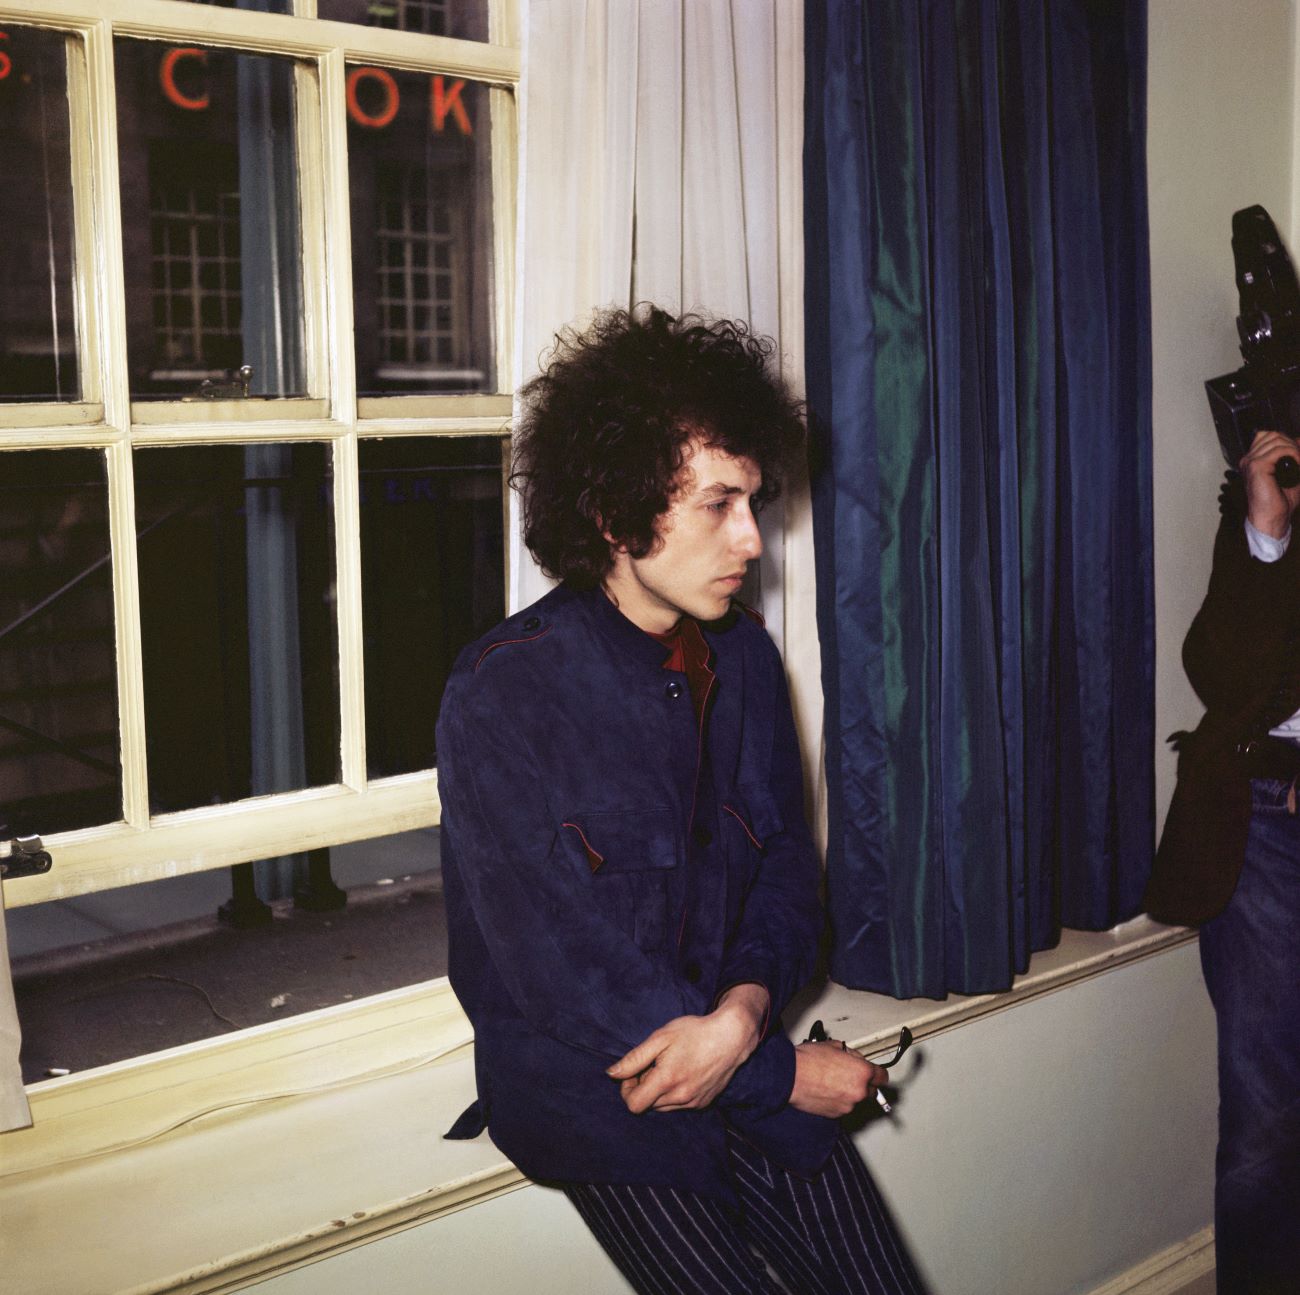 Bob Dylan is sitting at the window and is holding a cigarette. 